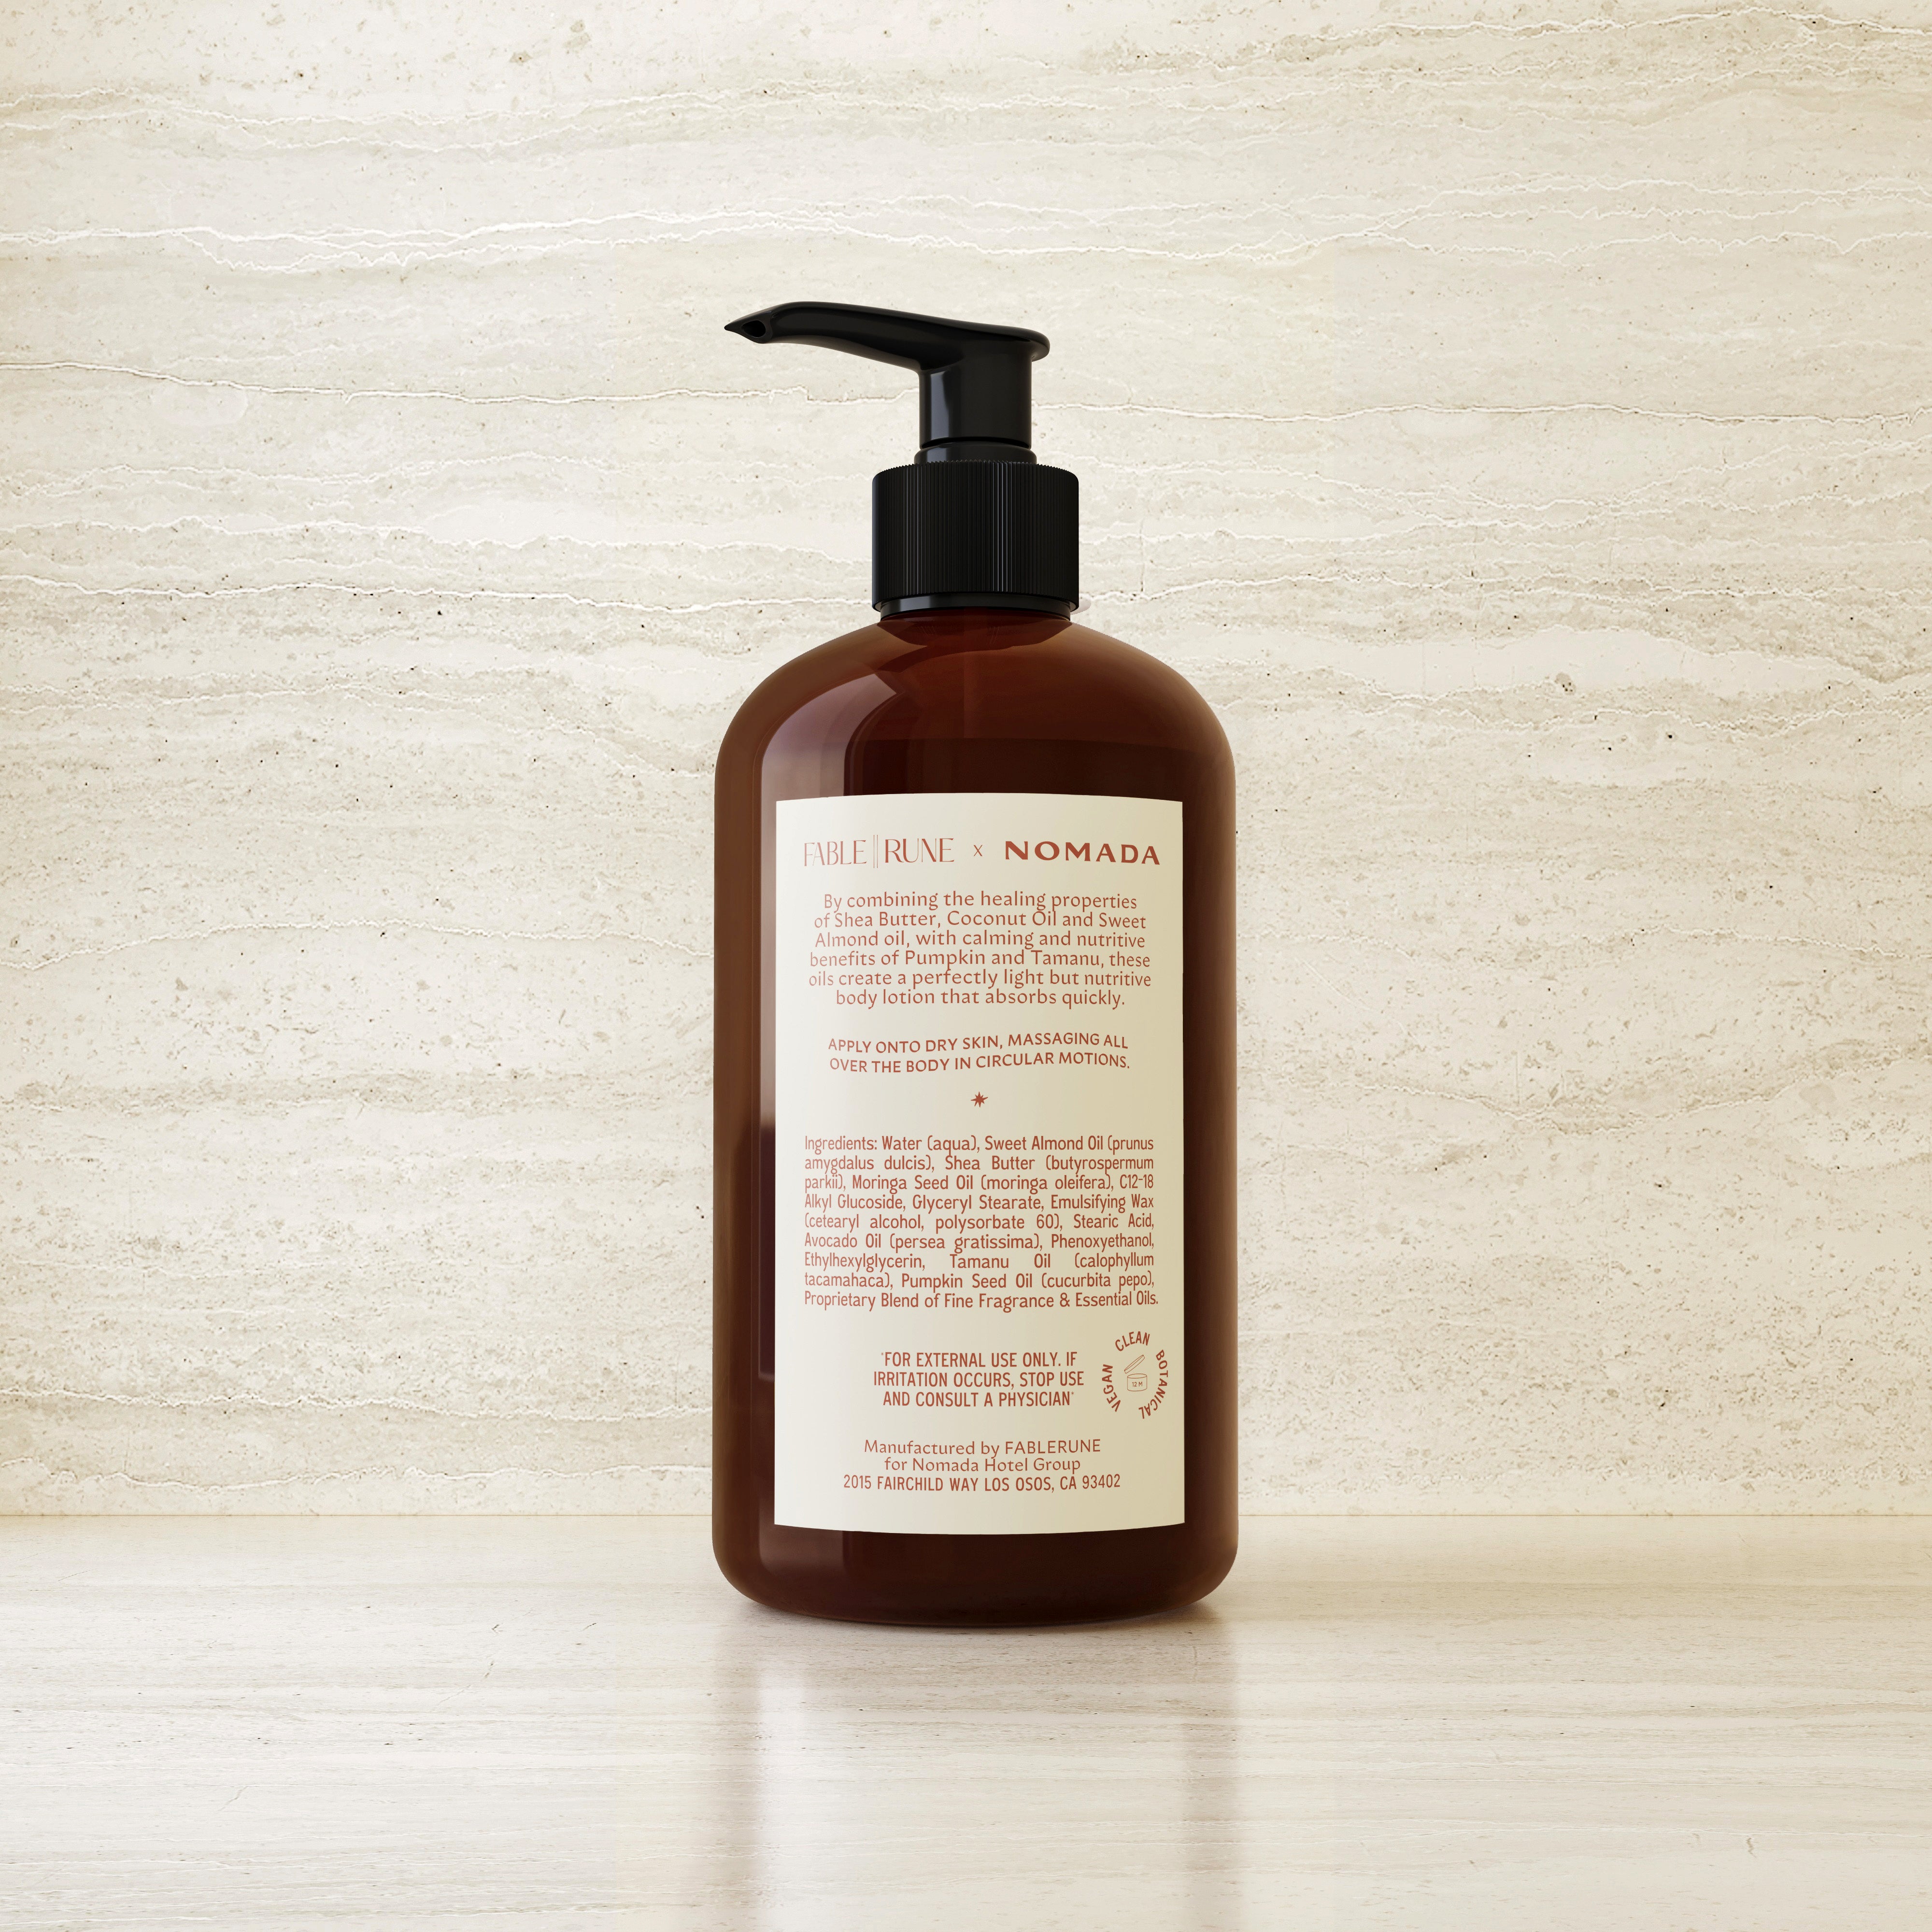 Yarrow &amp; Santal Lotion Fable Rune for Hotel Ynez Solvang by Nomada Deco